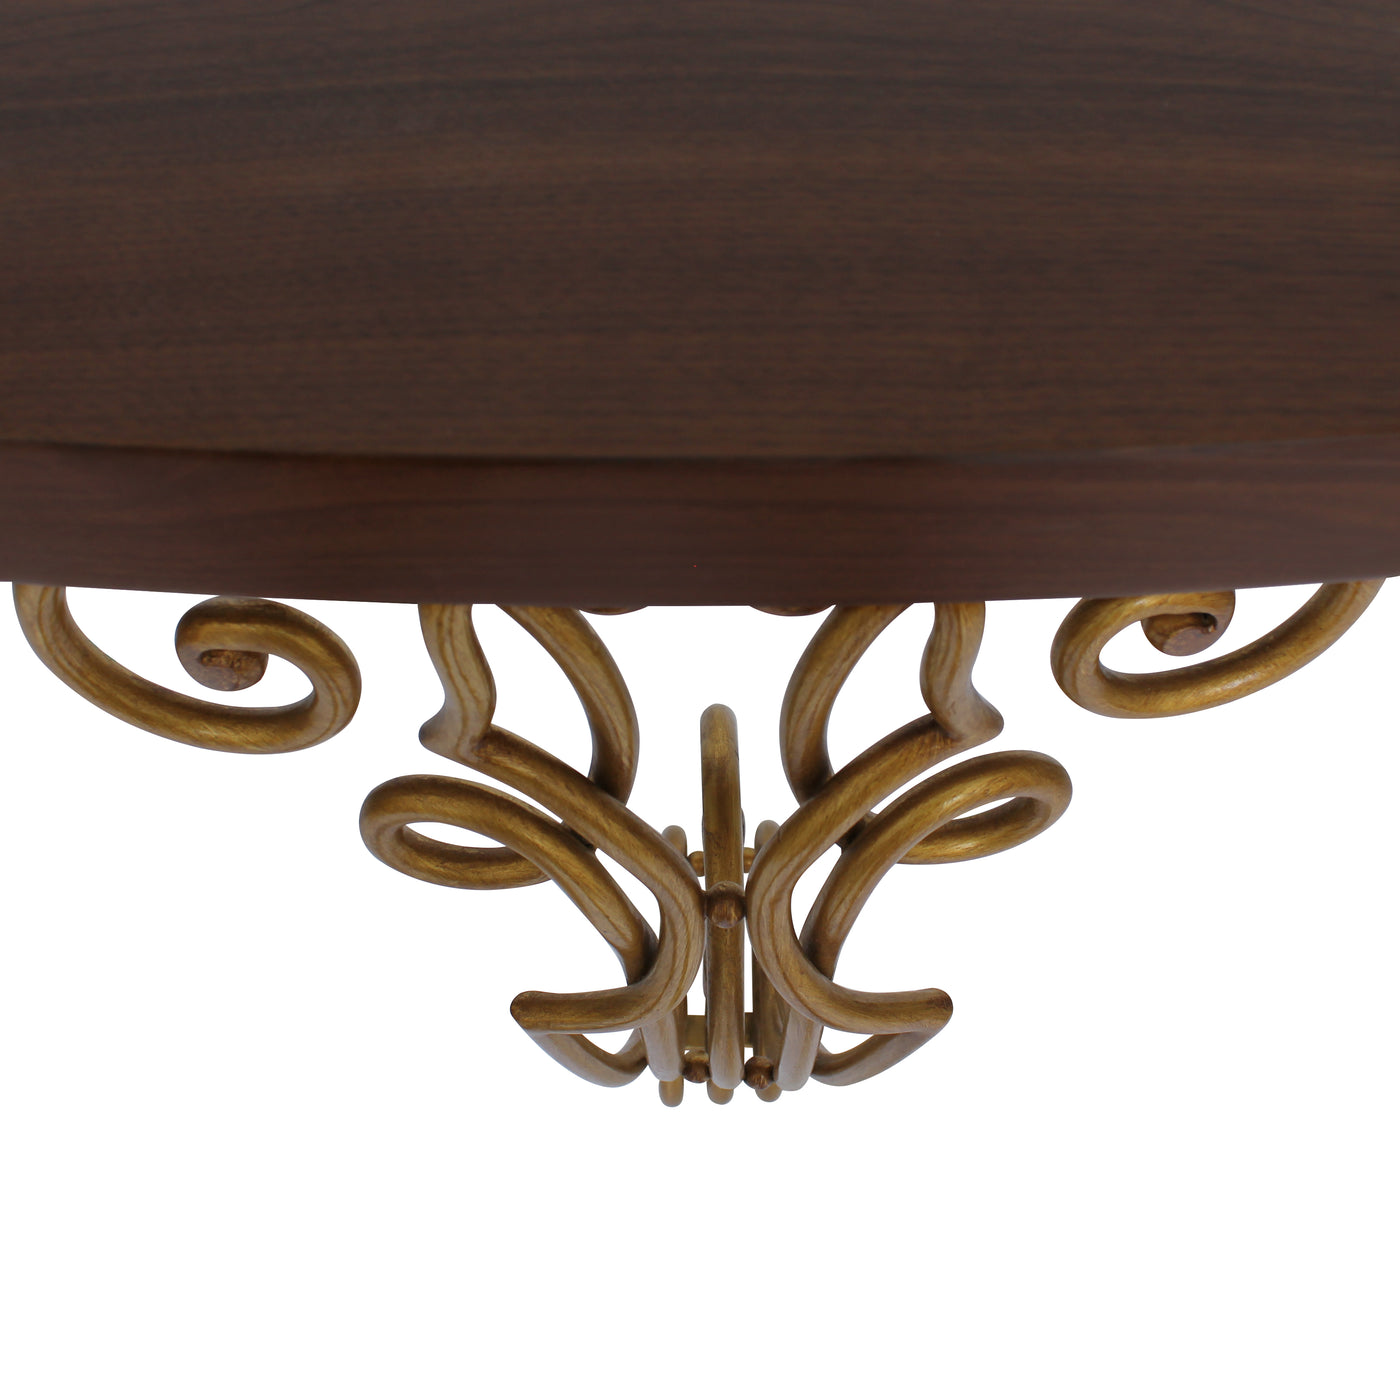 Close up of a bronze colored classical console with a wrought iron base and a dark wooden top